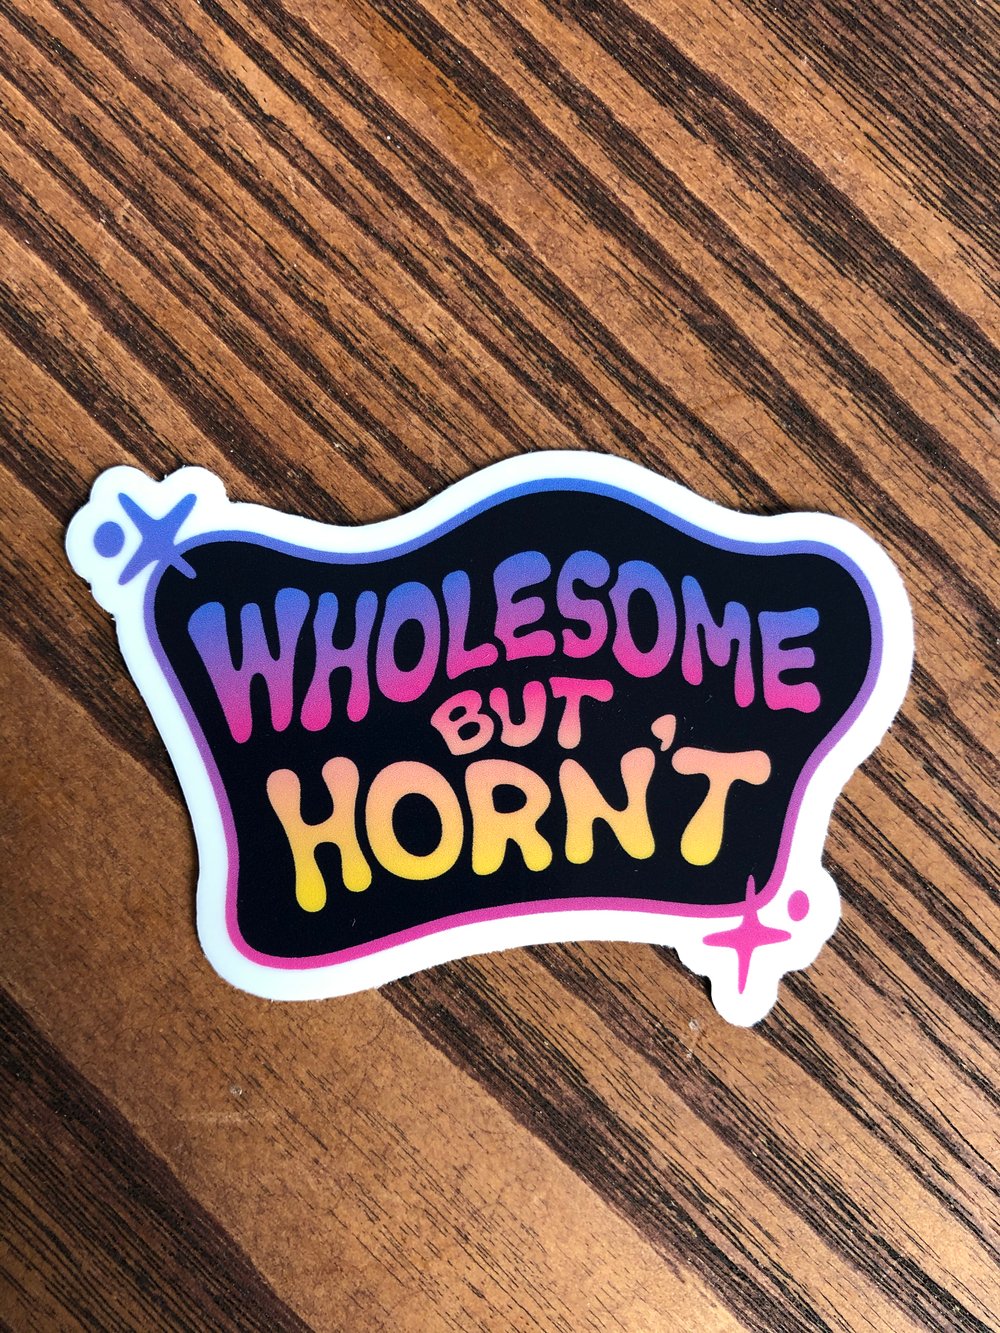 Image of Wholesome but Horn’t sticker